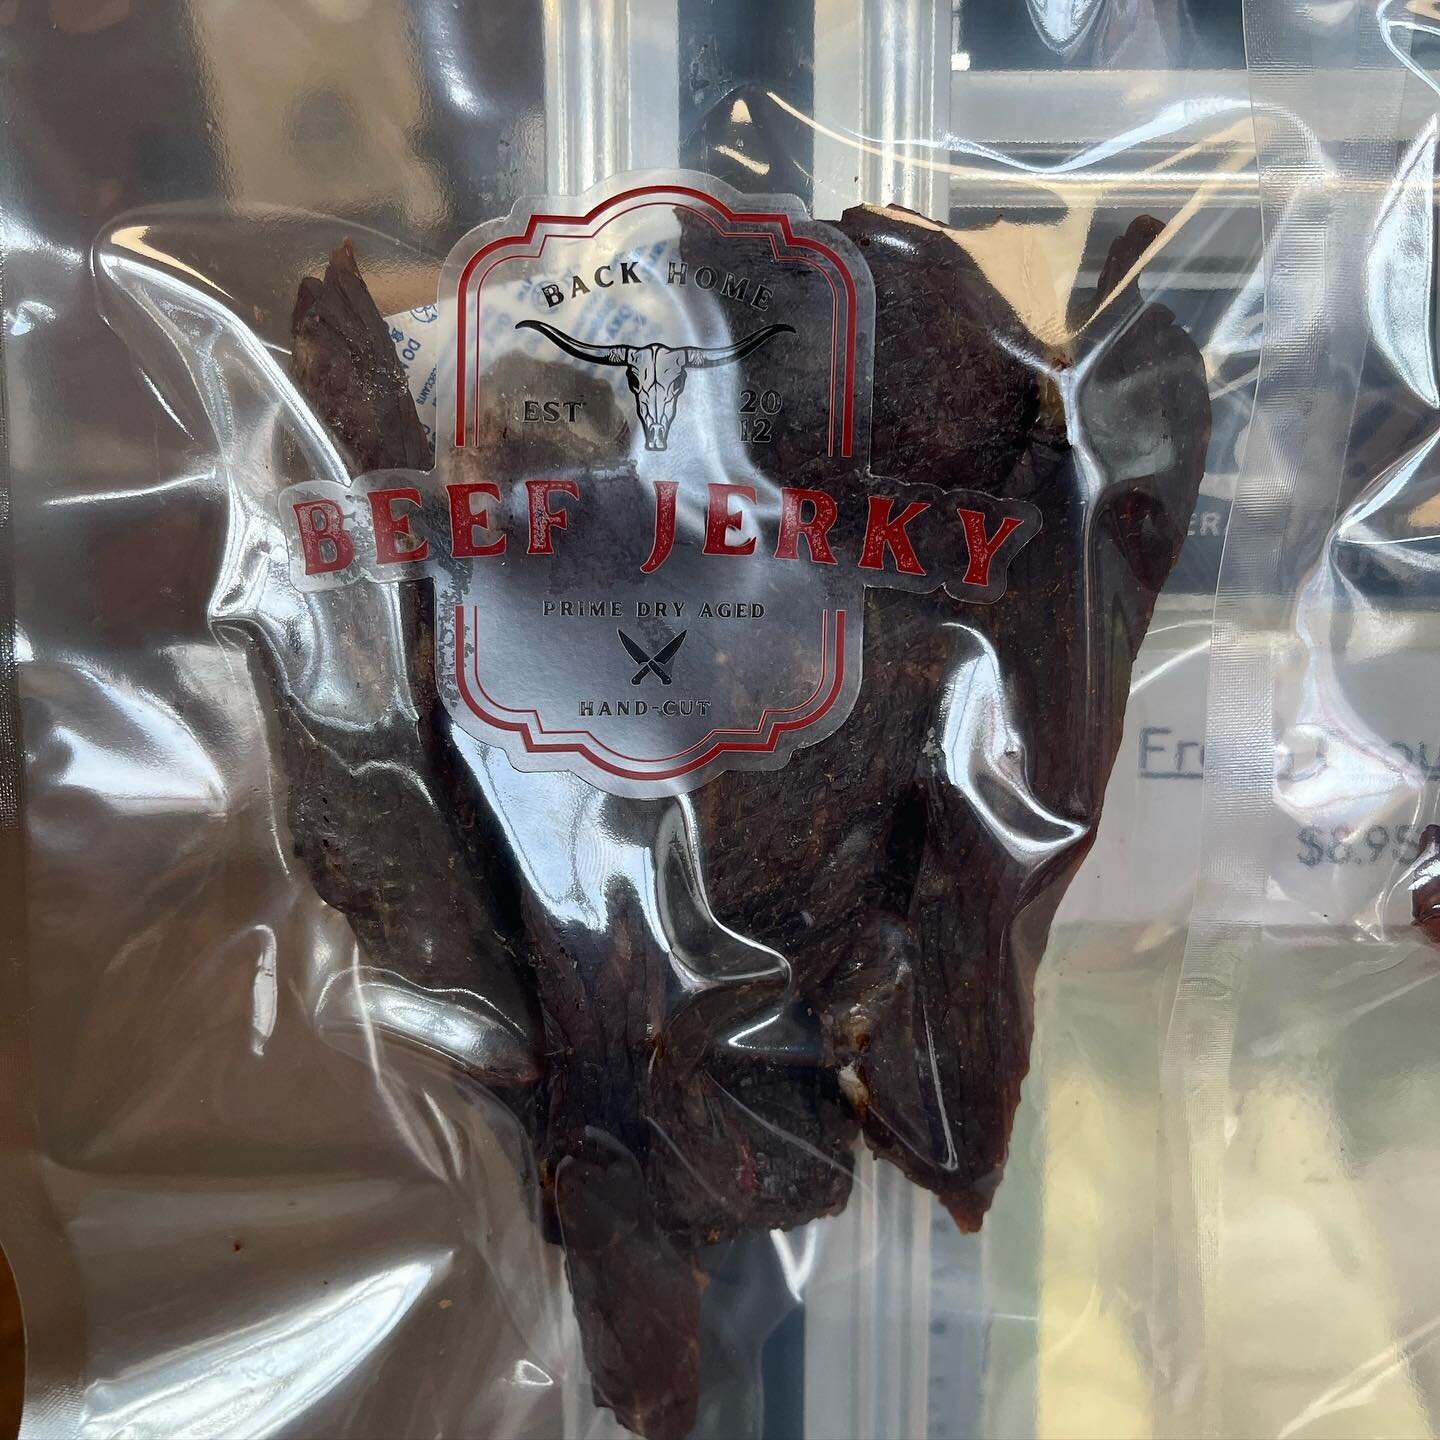 Come on in to @backhomebutchershop try our new flavor!
Jacked up! 

#beef #beefjerky